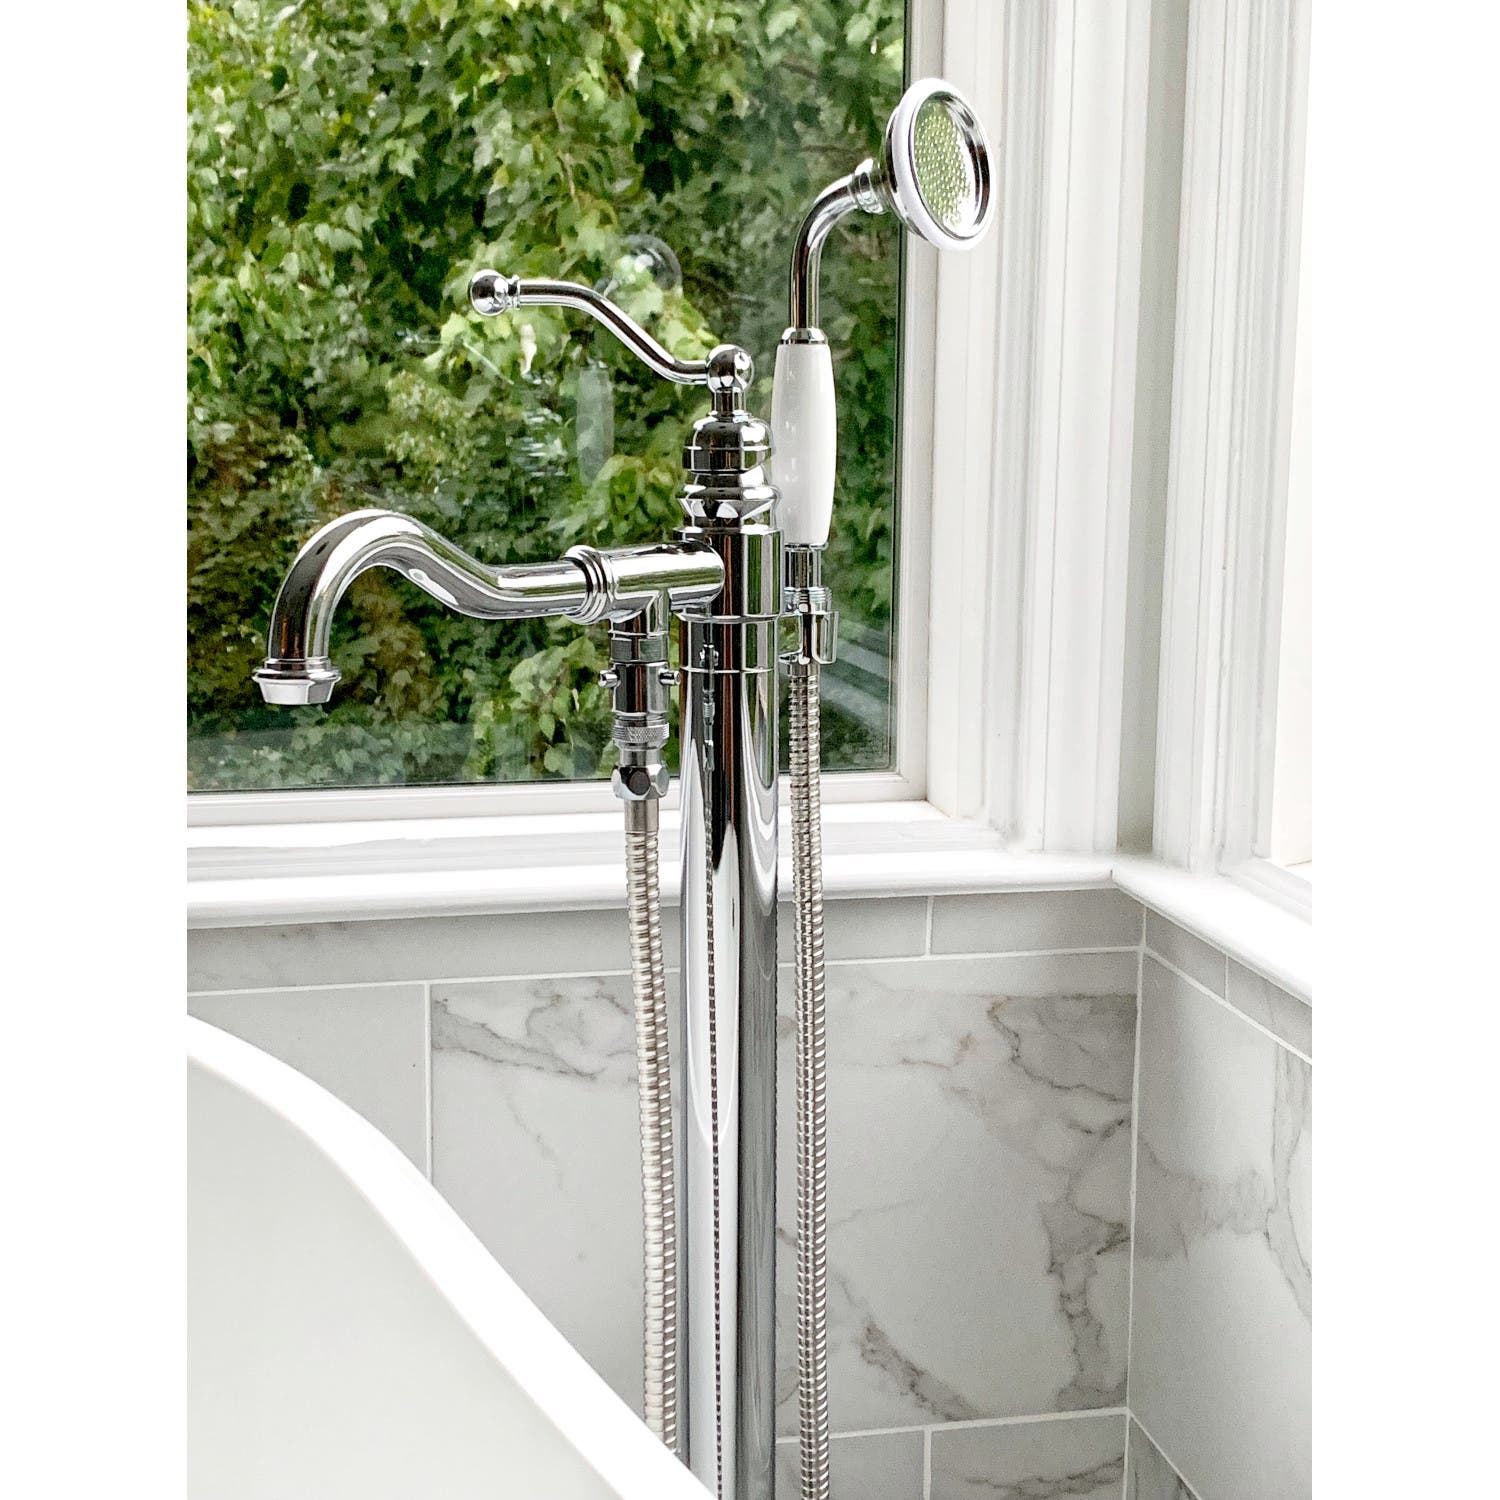 Kingston Brass English Country Freestanding Tub Faucet with Hand Shower (KS7138ABL)